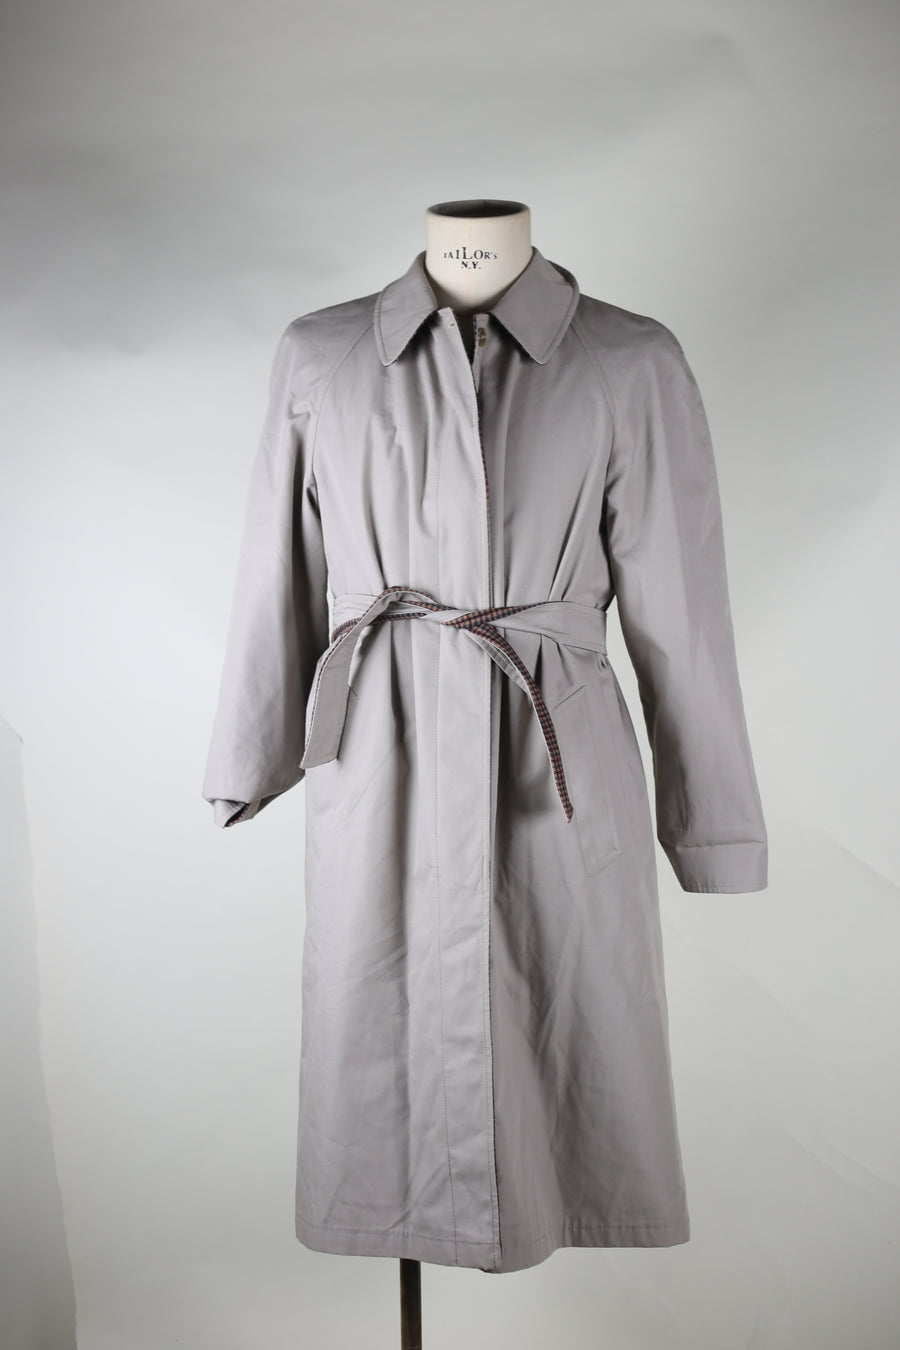 DOUBLE FACE Vintage Trench Coat - M -